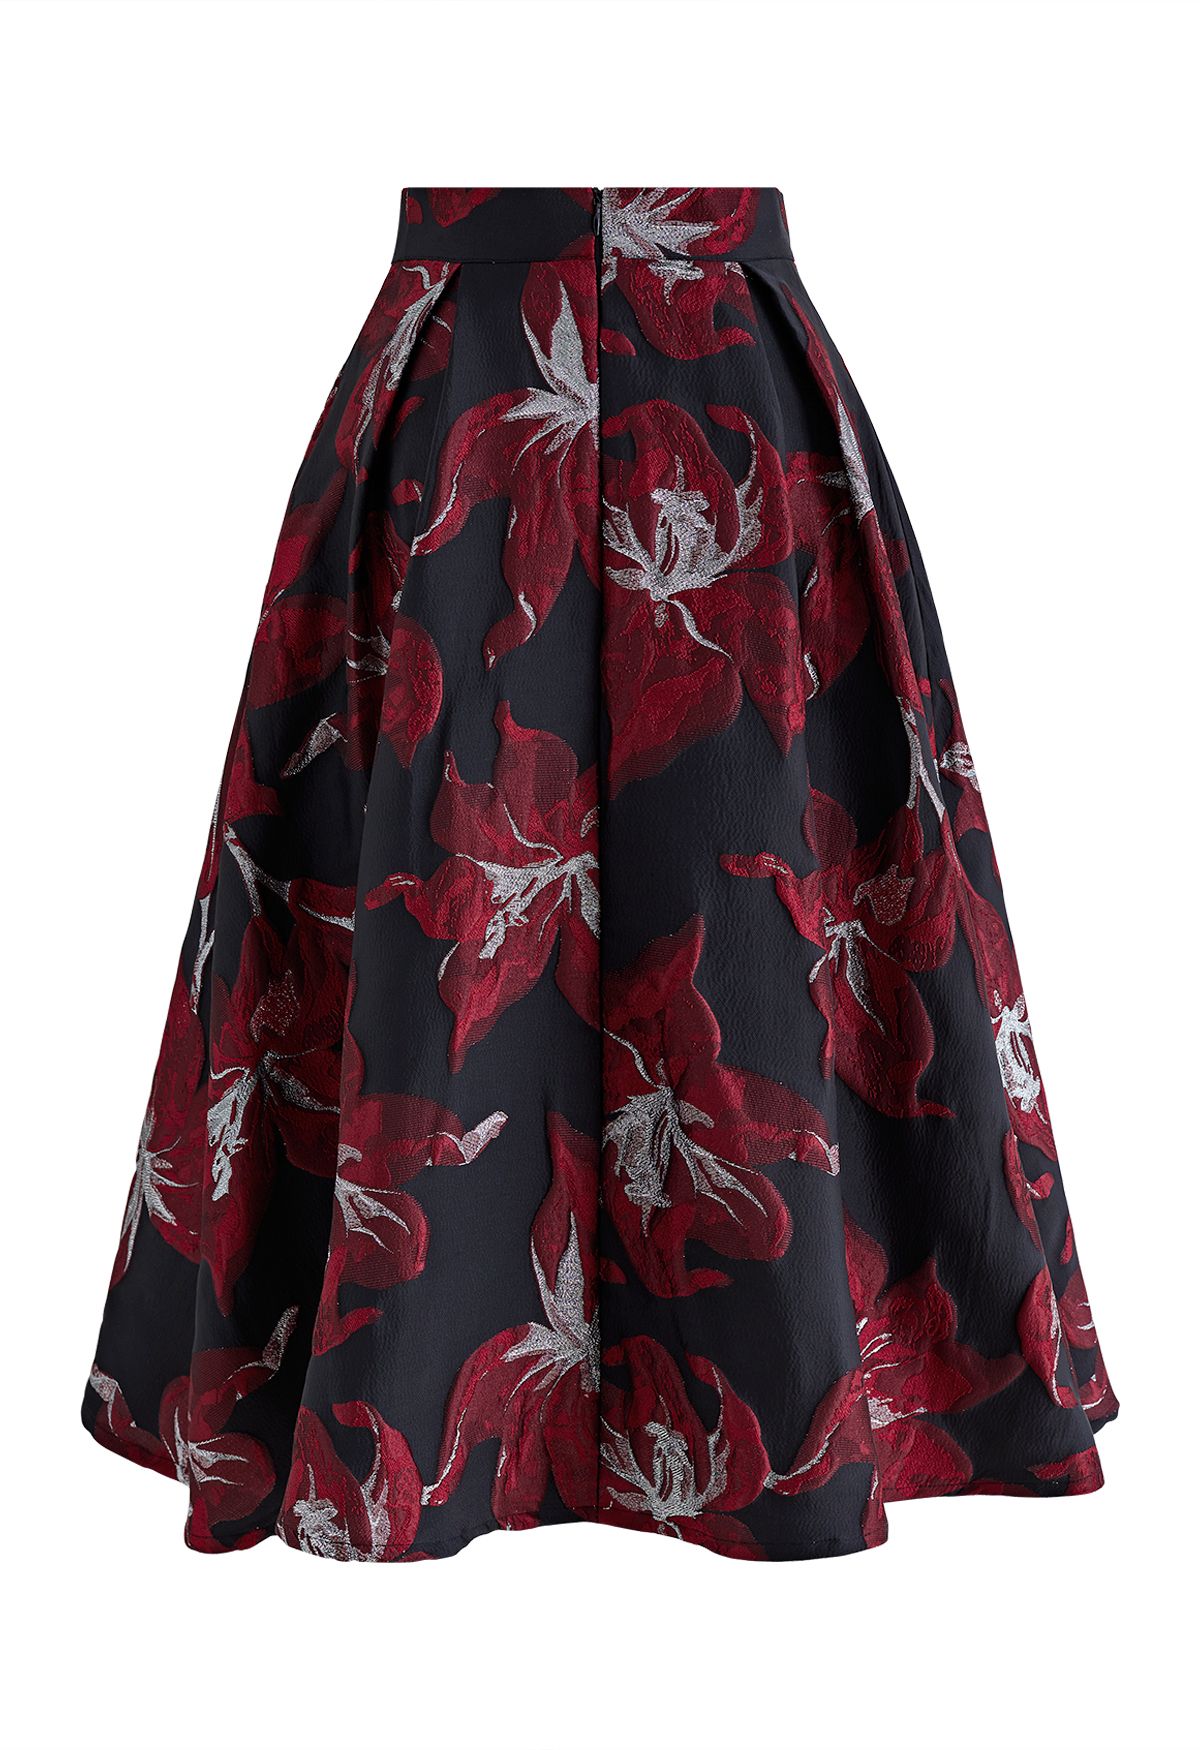 Lily Blossom Metallic Jacquard Midi Skirt in Red - Retro, Indie 